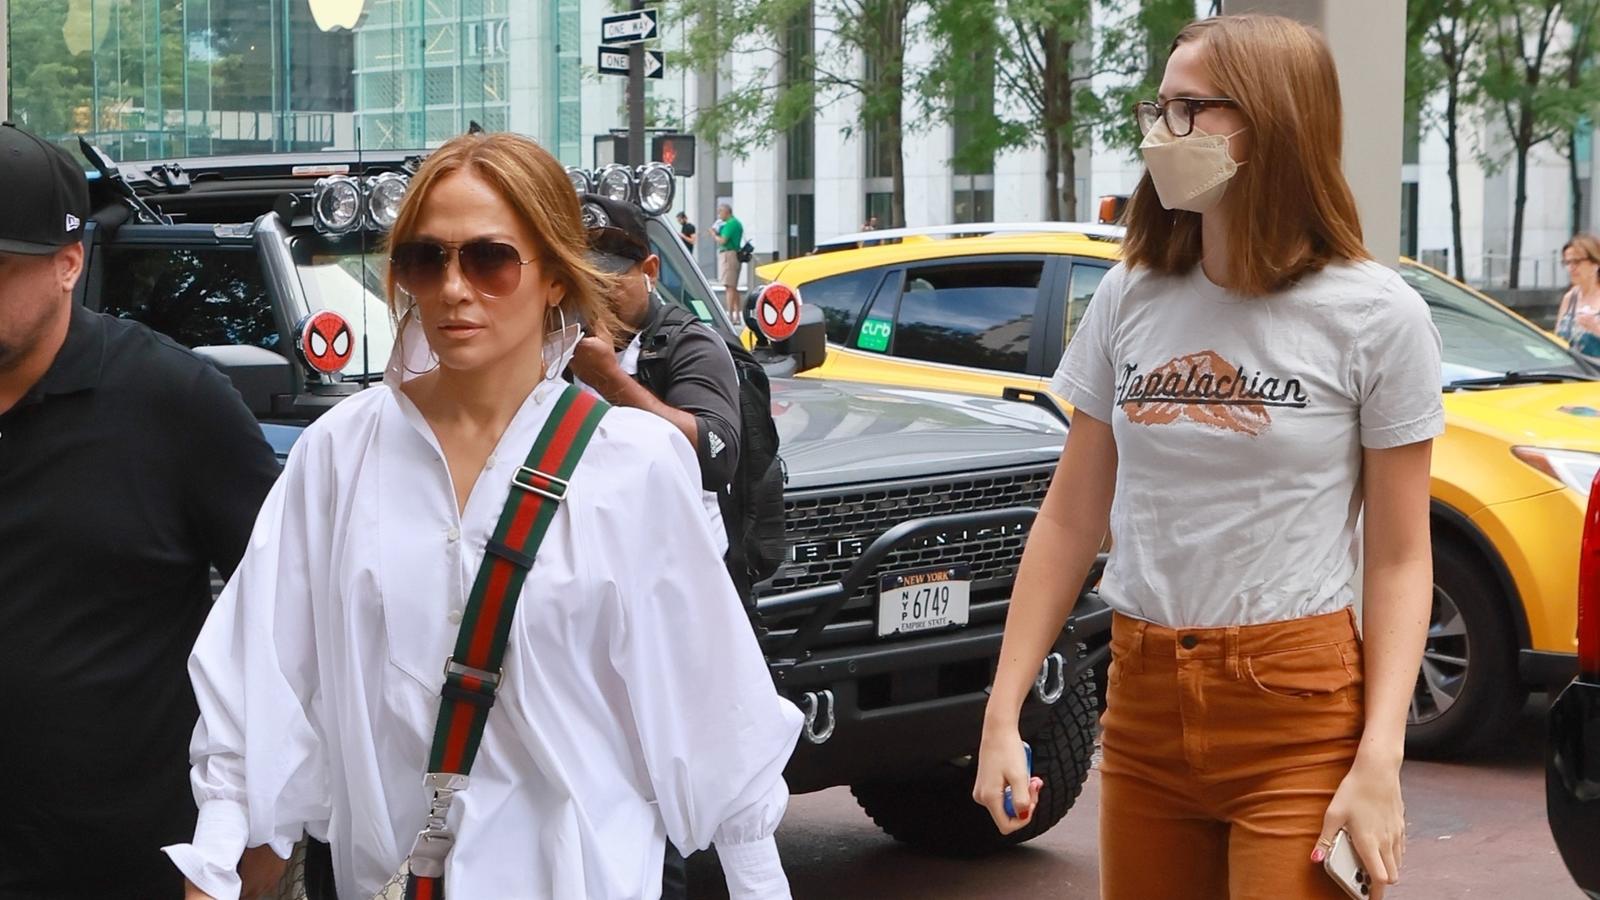 New York, NY - Jennifer Lopez cuts a casual figure as she goes shopping at Bergdorf Goodman. Pictured: Jennifer Lopez BACKGRID USA 14 AUGUST 2022